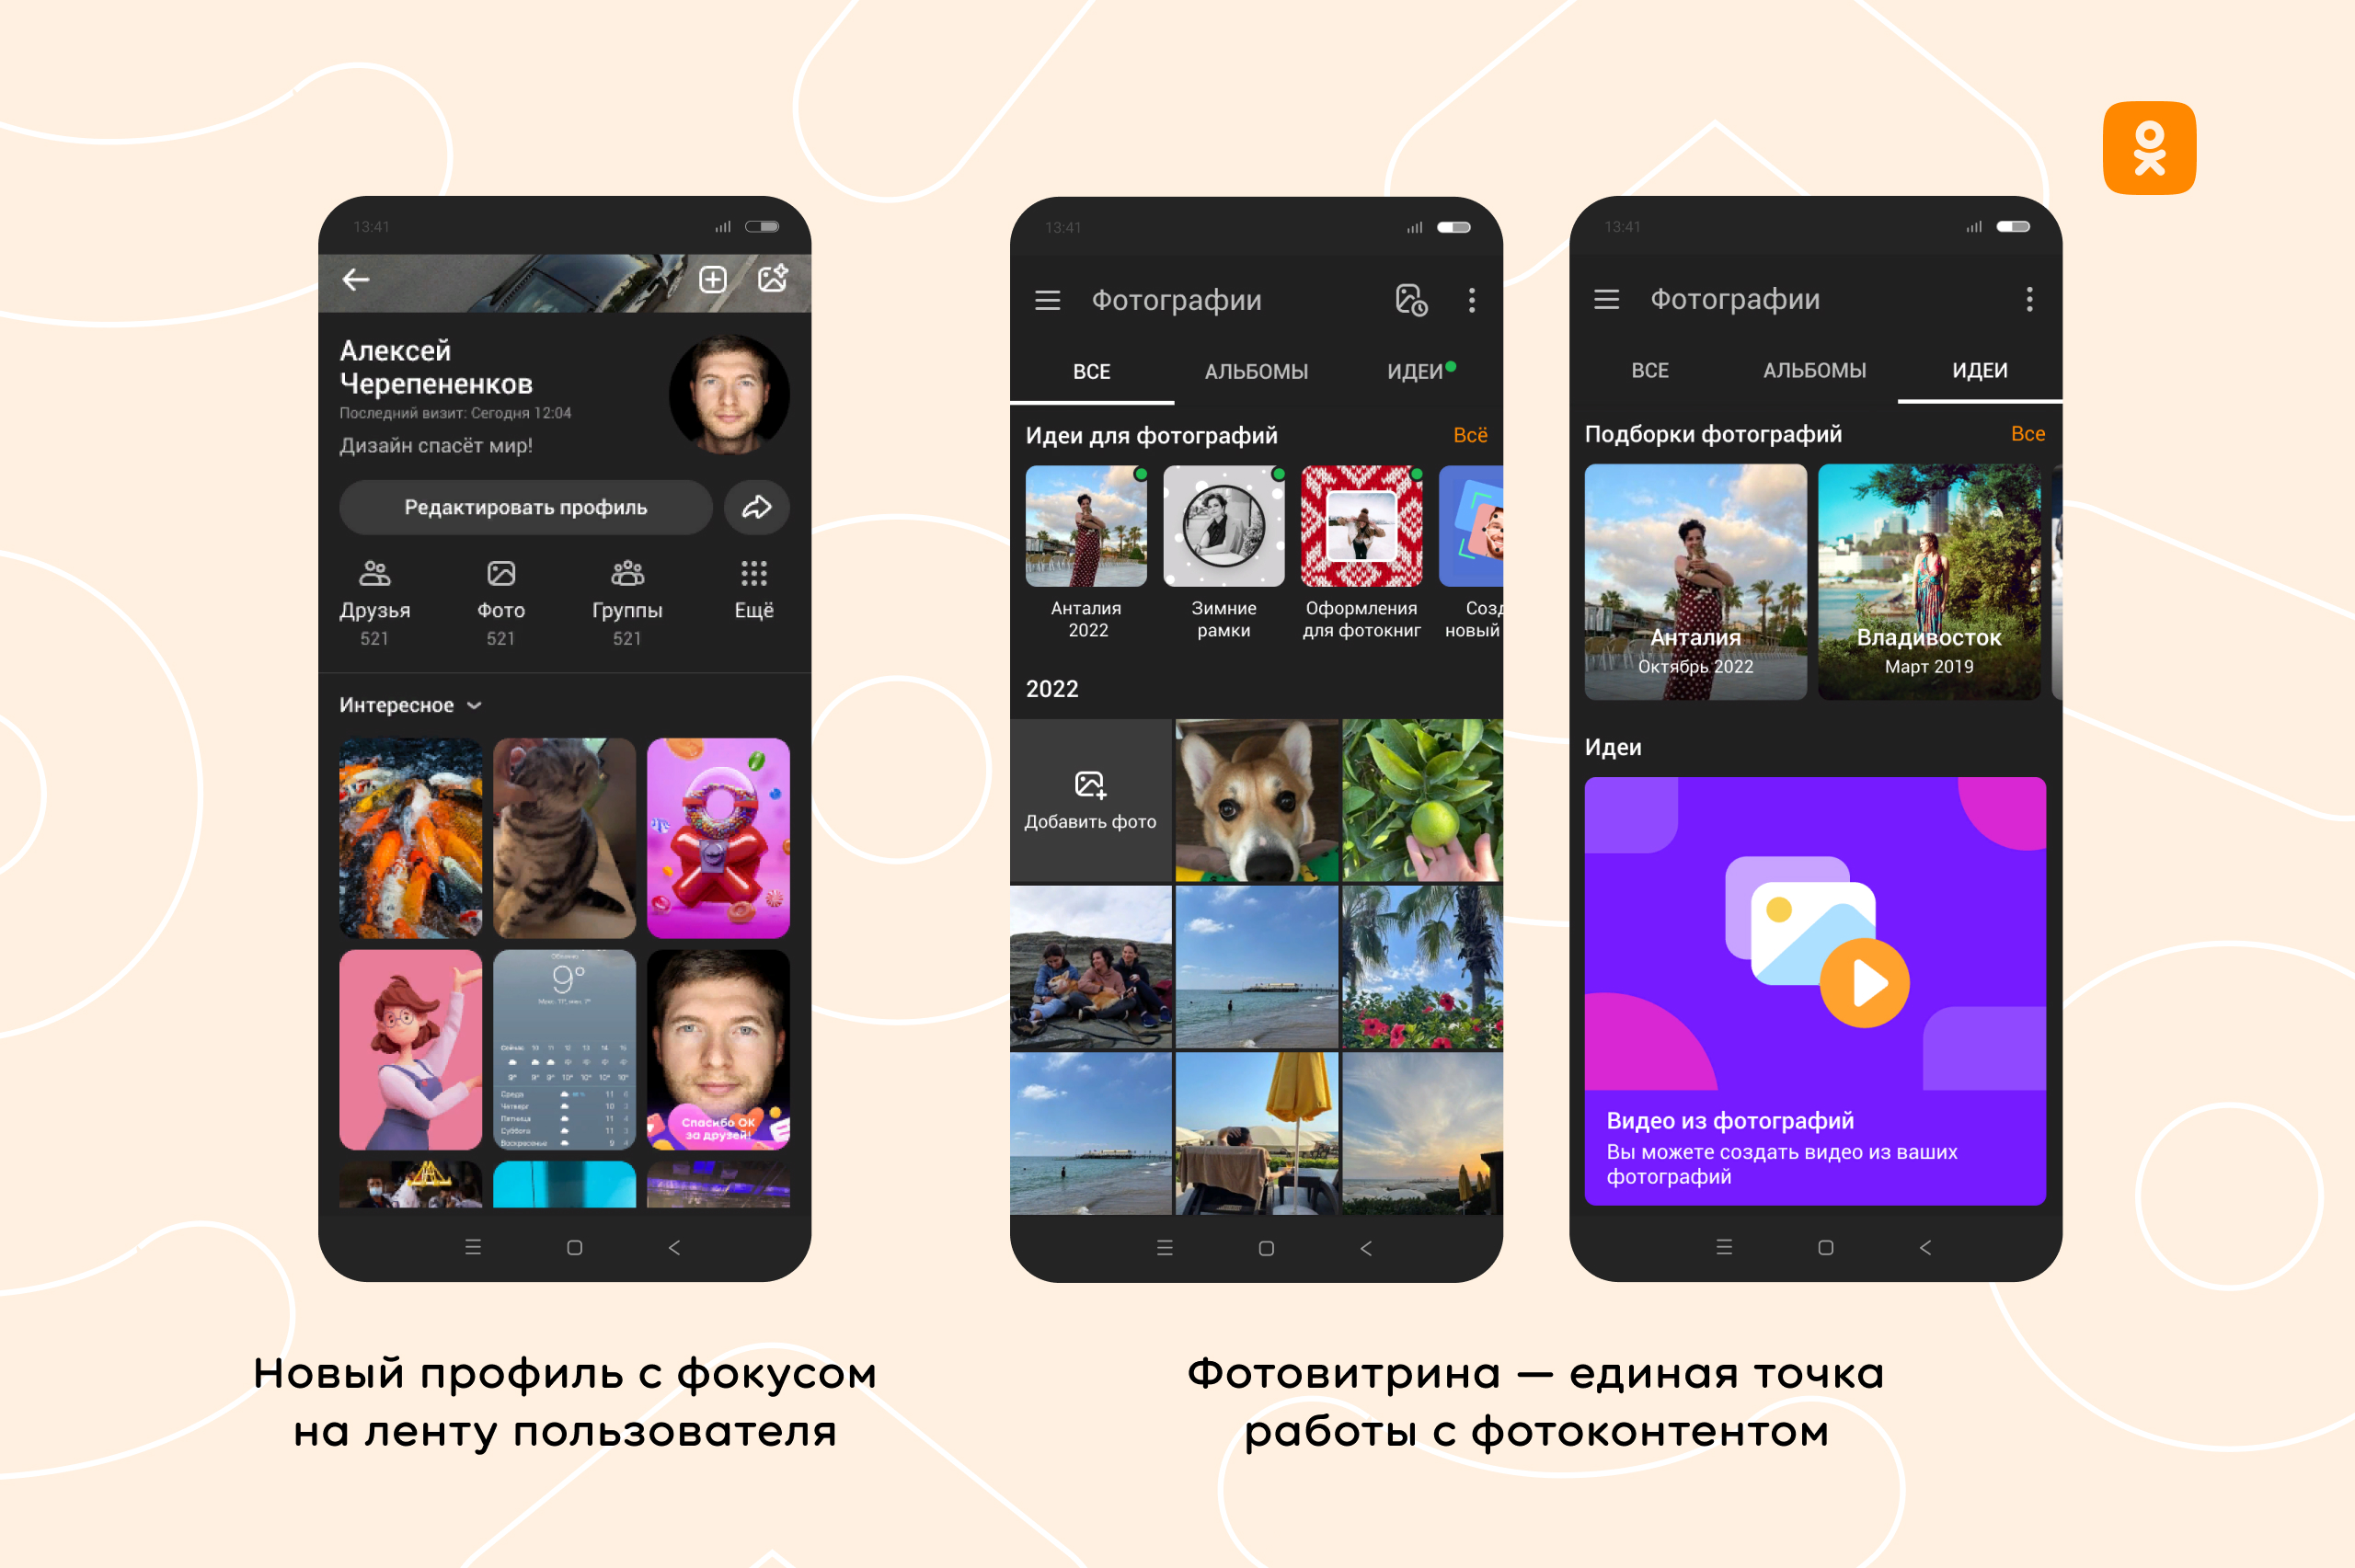 New “Odnoklassniki” – with a full-screen feed, redesigned profiles and a photo showcase